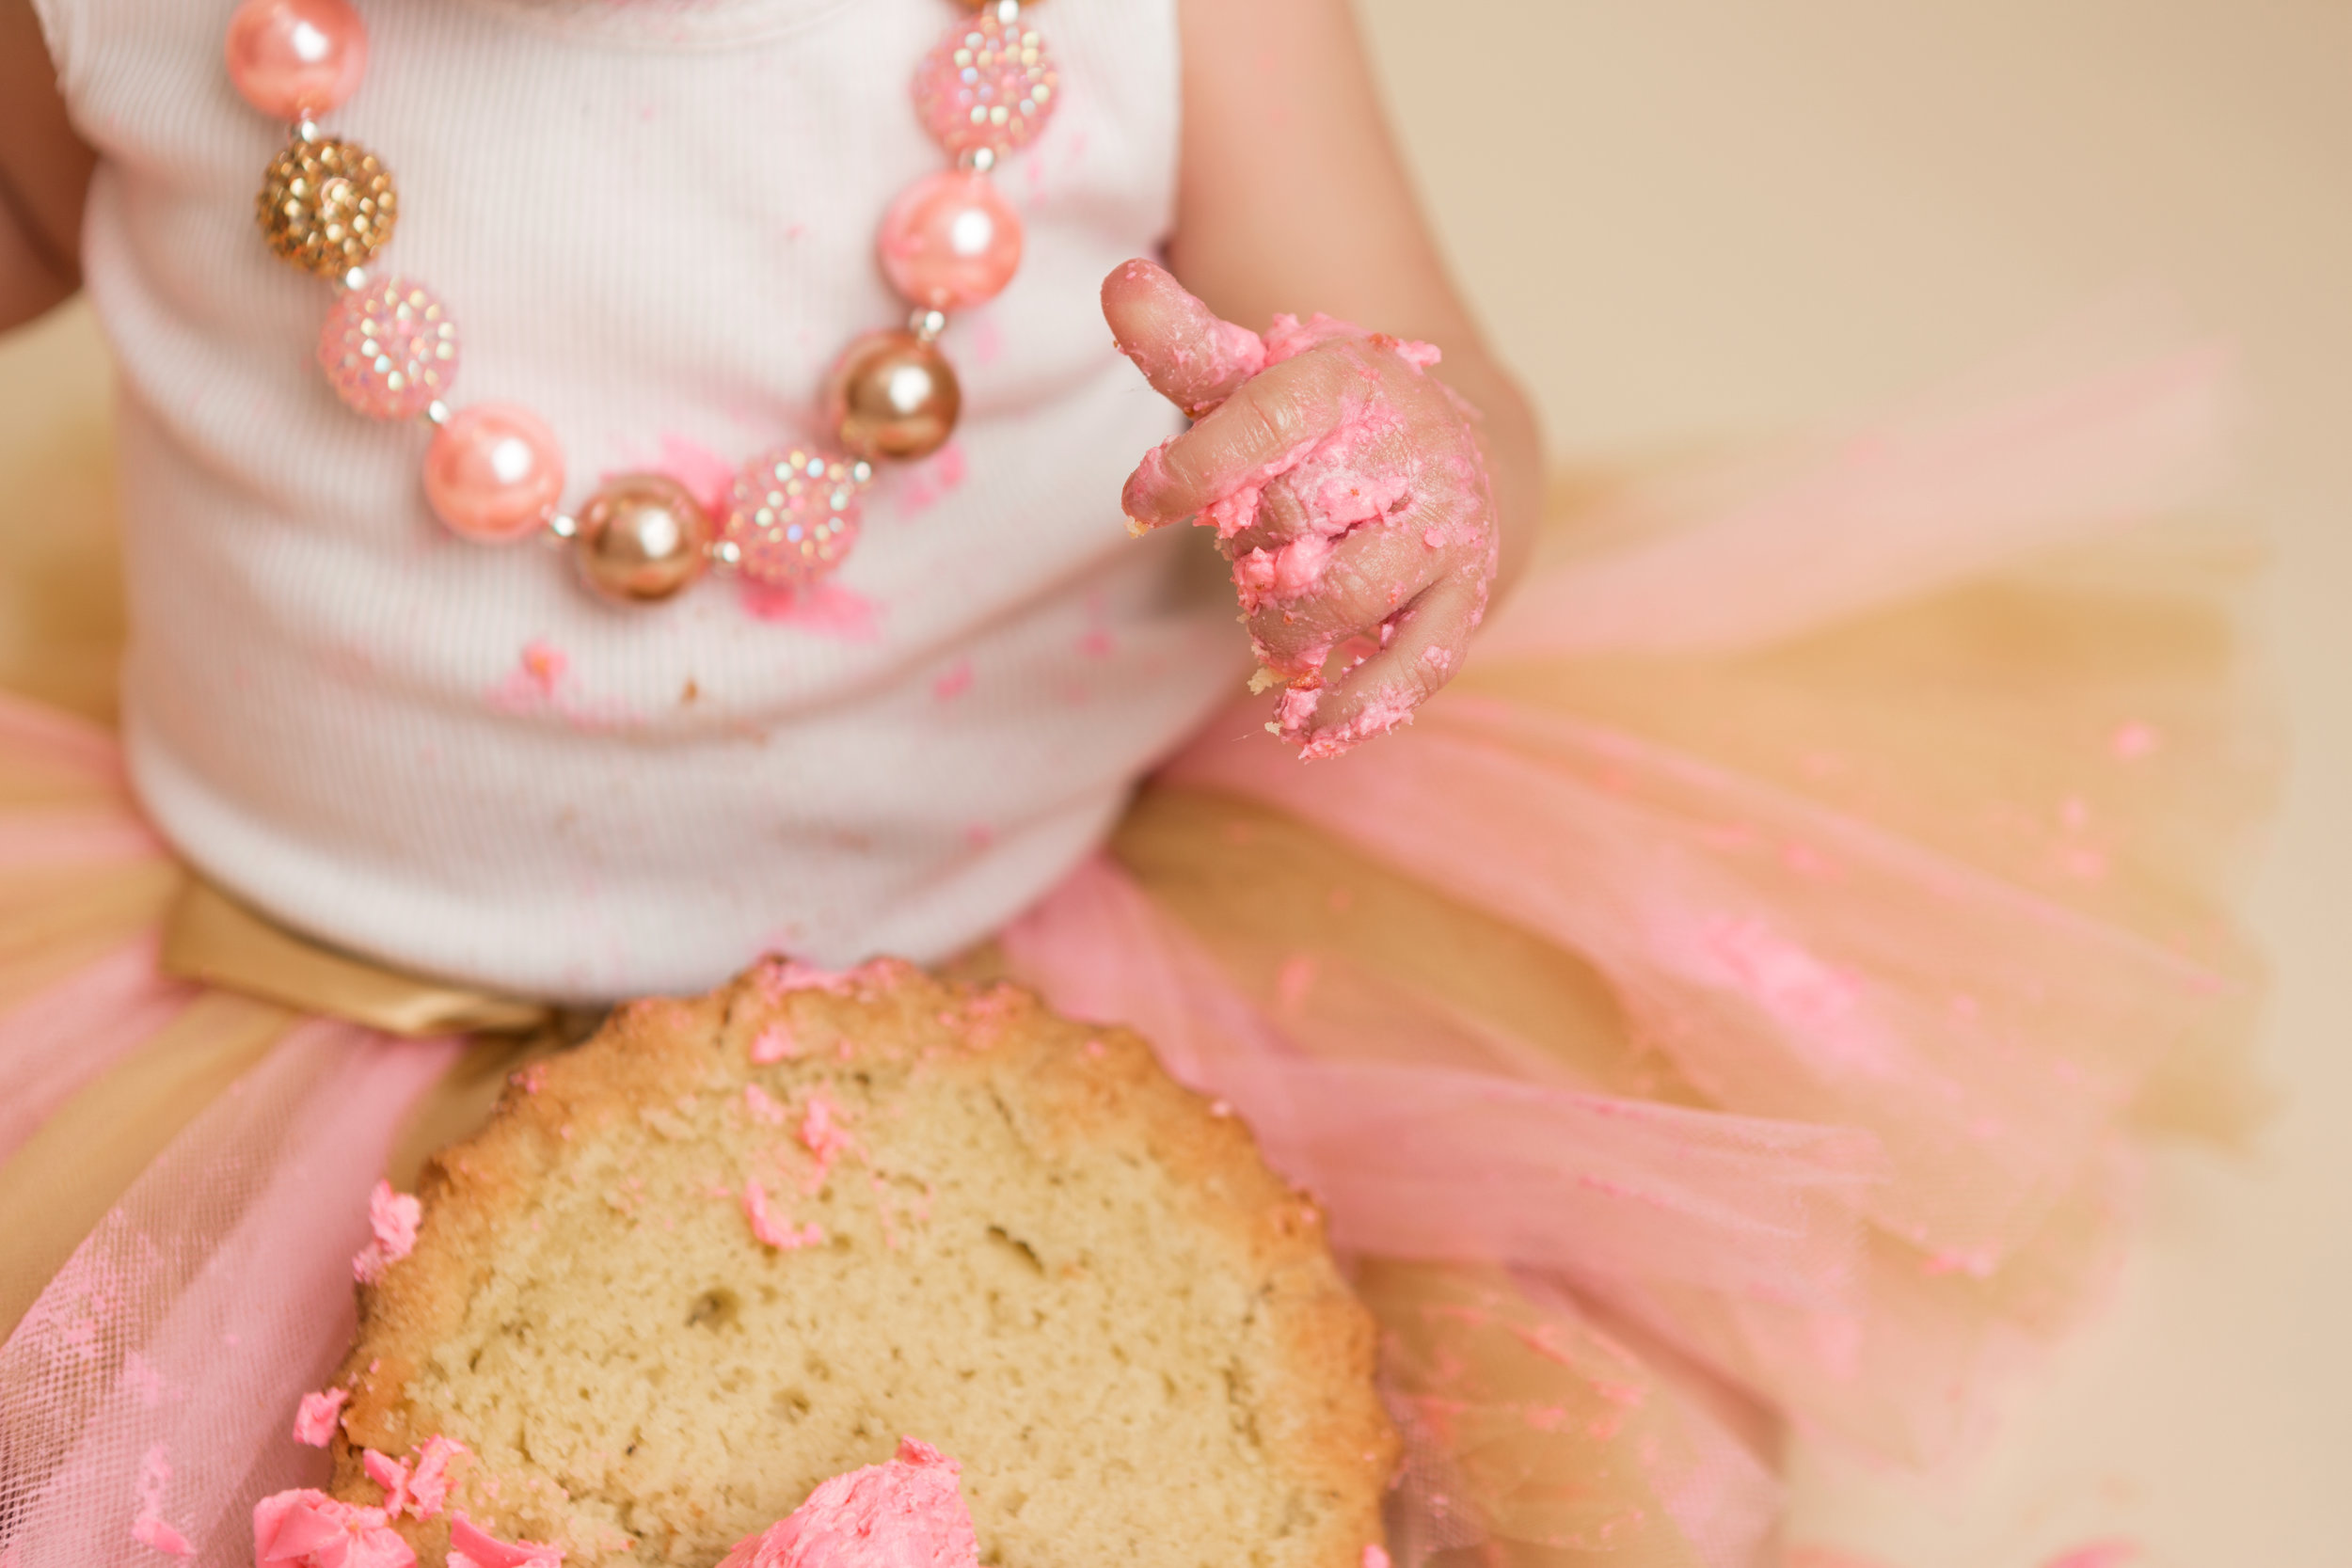 messy aftermath of a birthday cake smash- a baby's hand with pink frosting